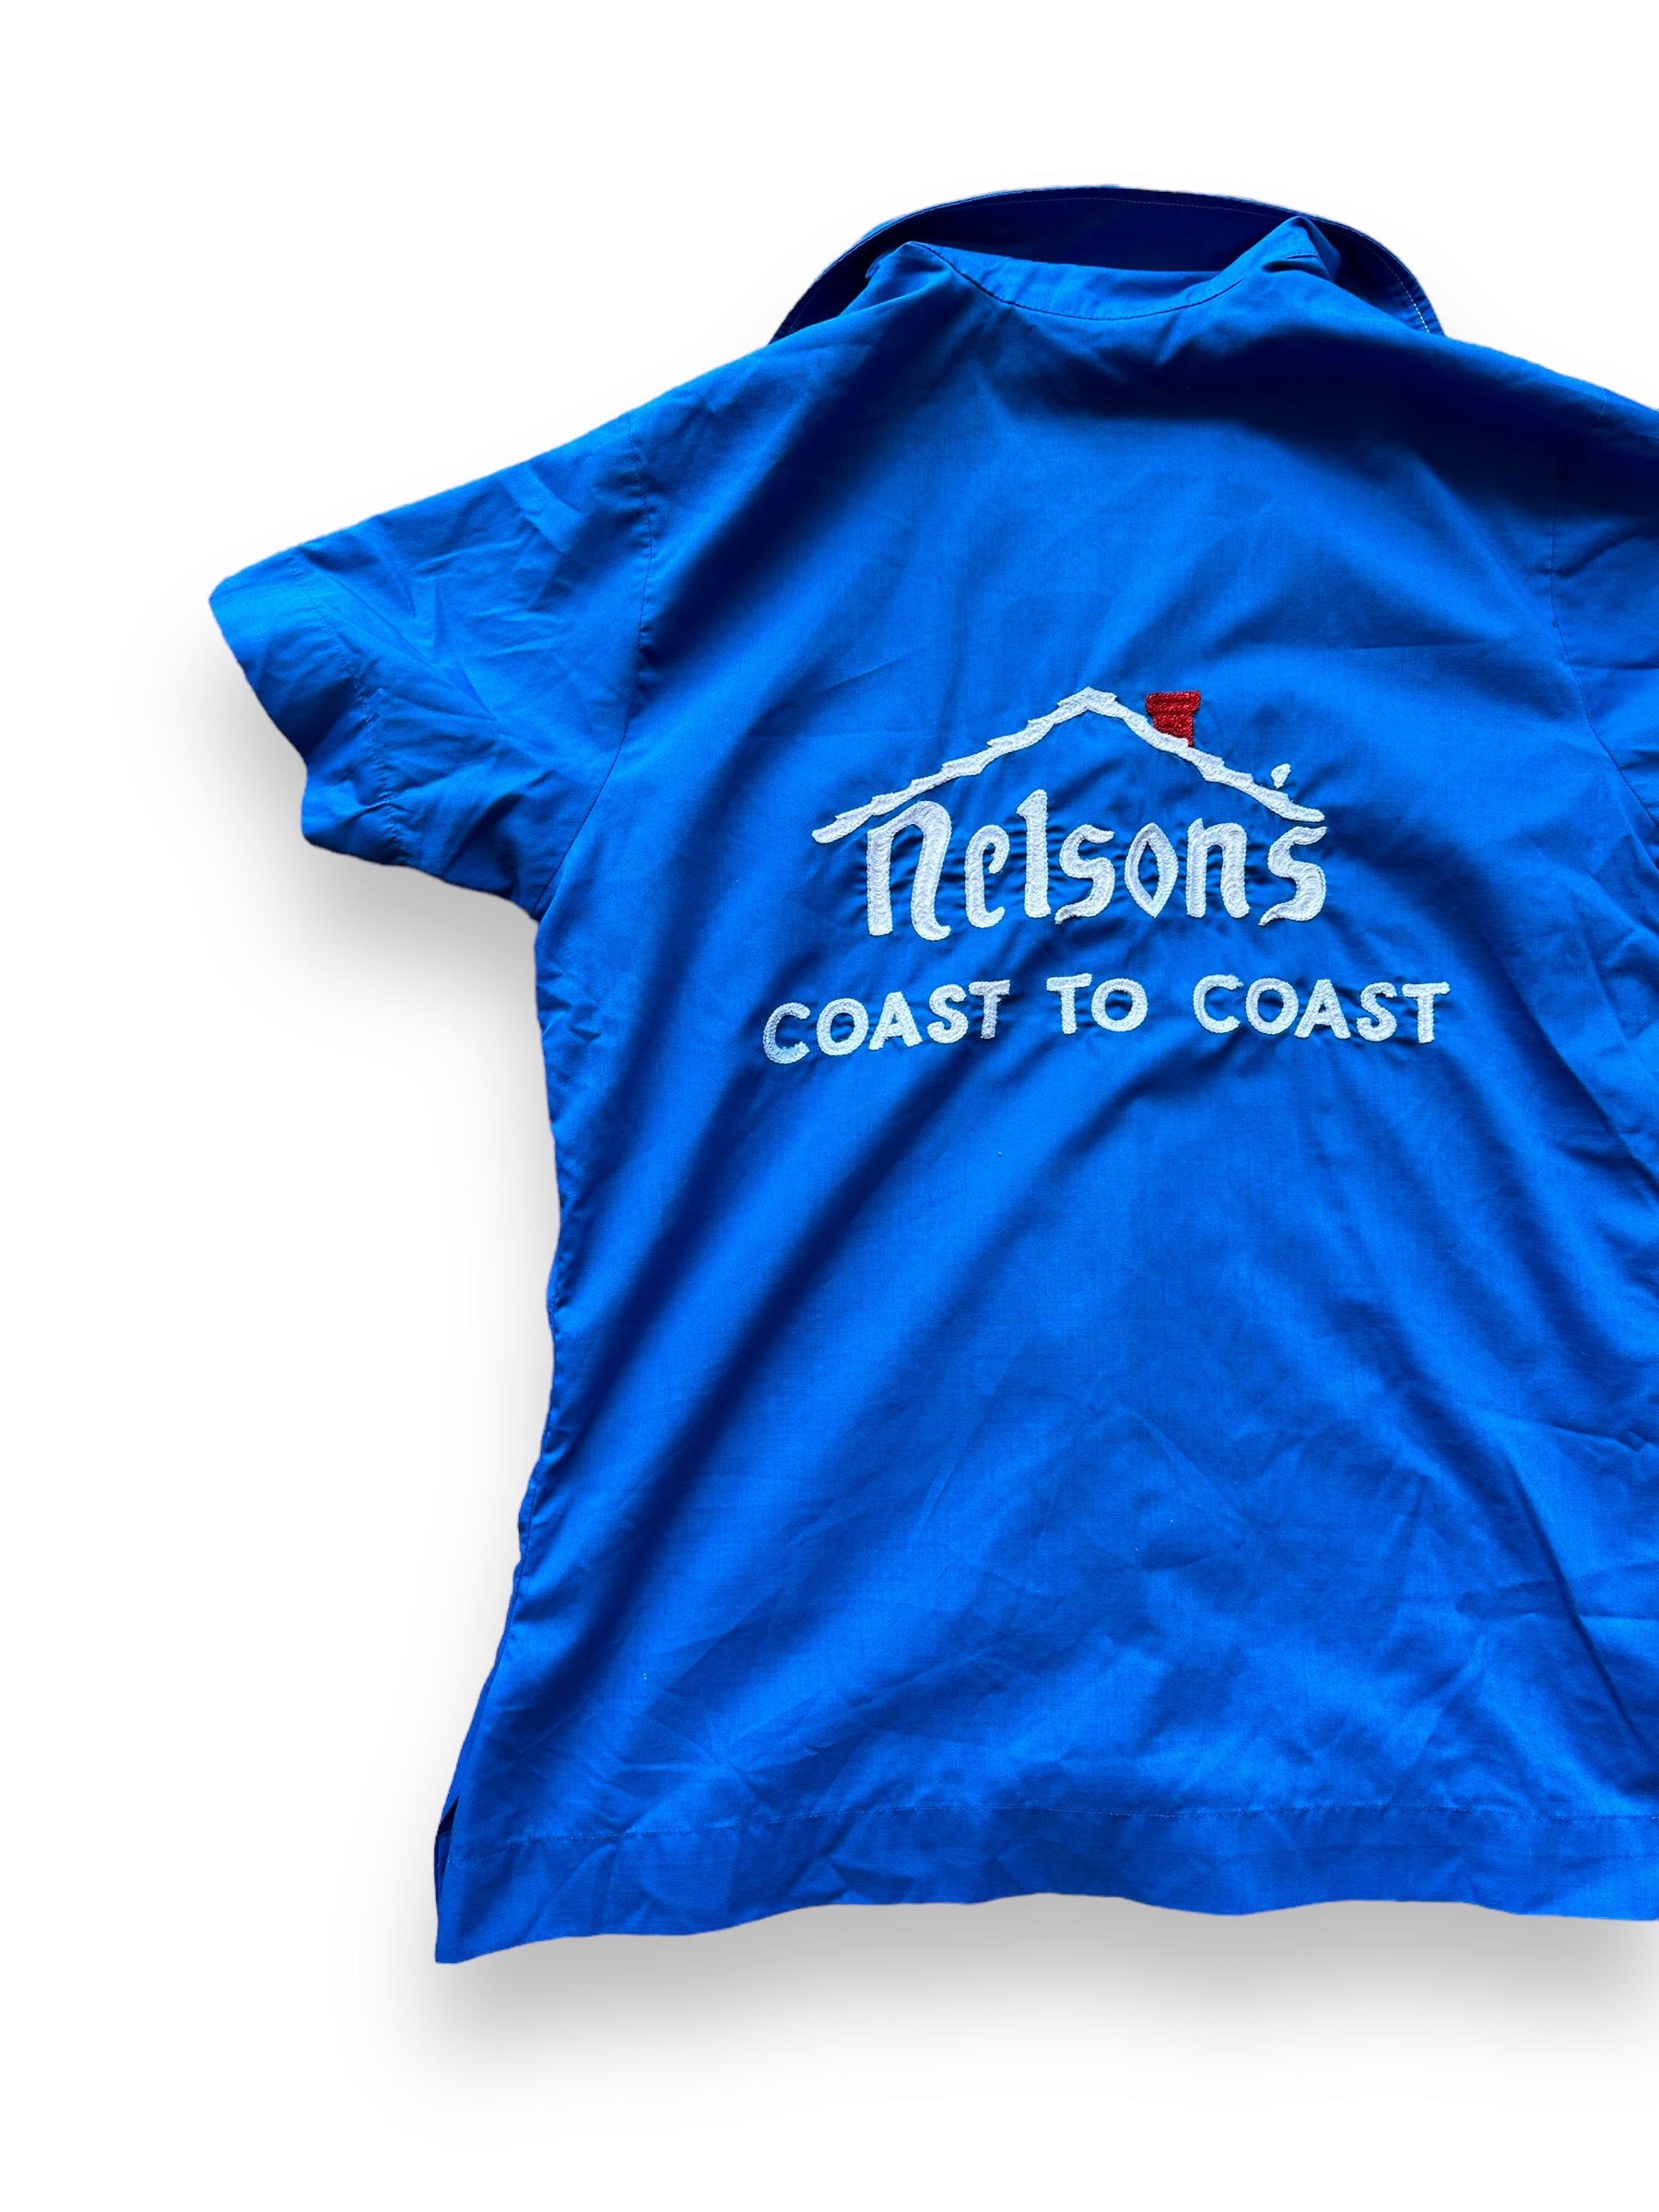 Back left of Vintage "Nelson's Coast to Coast" Chainstitched Bowling Shirt SZ S | Vintage Bowling Shirt Seattle | Barn Owl Vintage Seattle